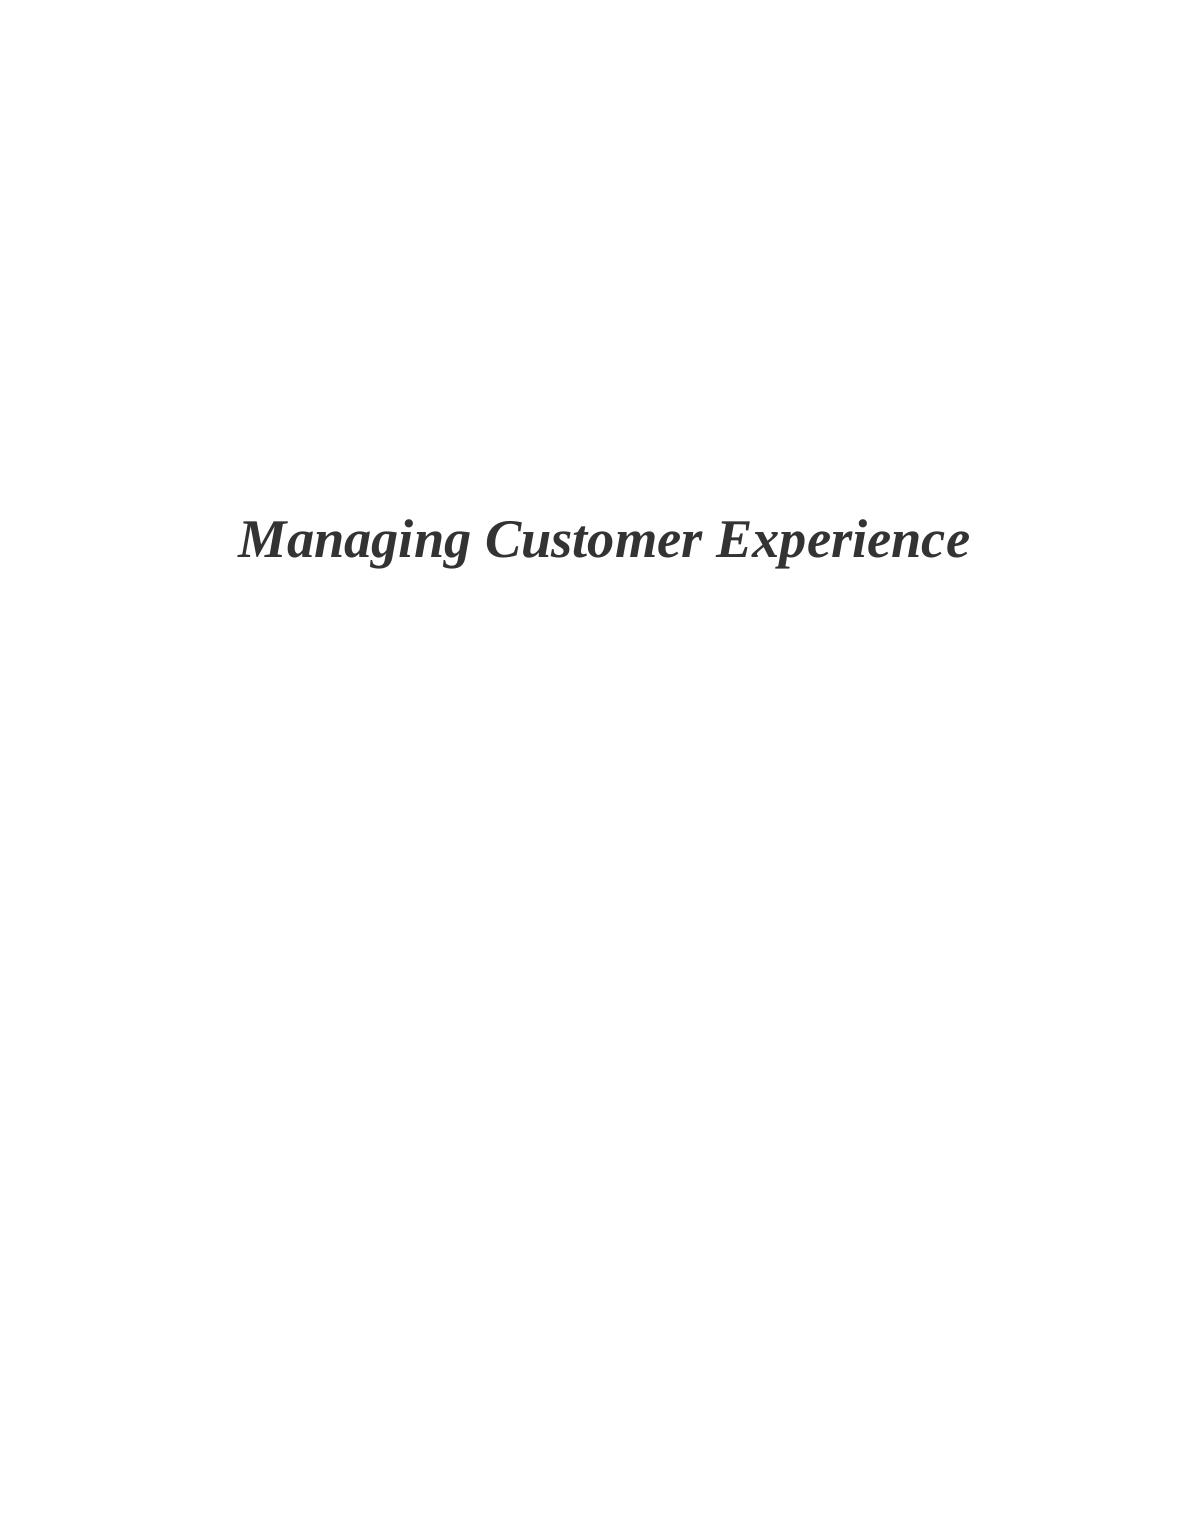 Managing Customer Experience Assignment | Hilton Hotel_1